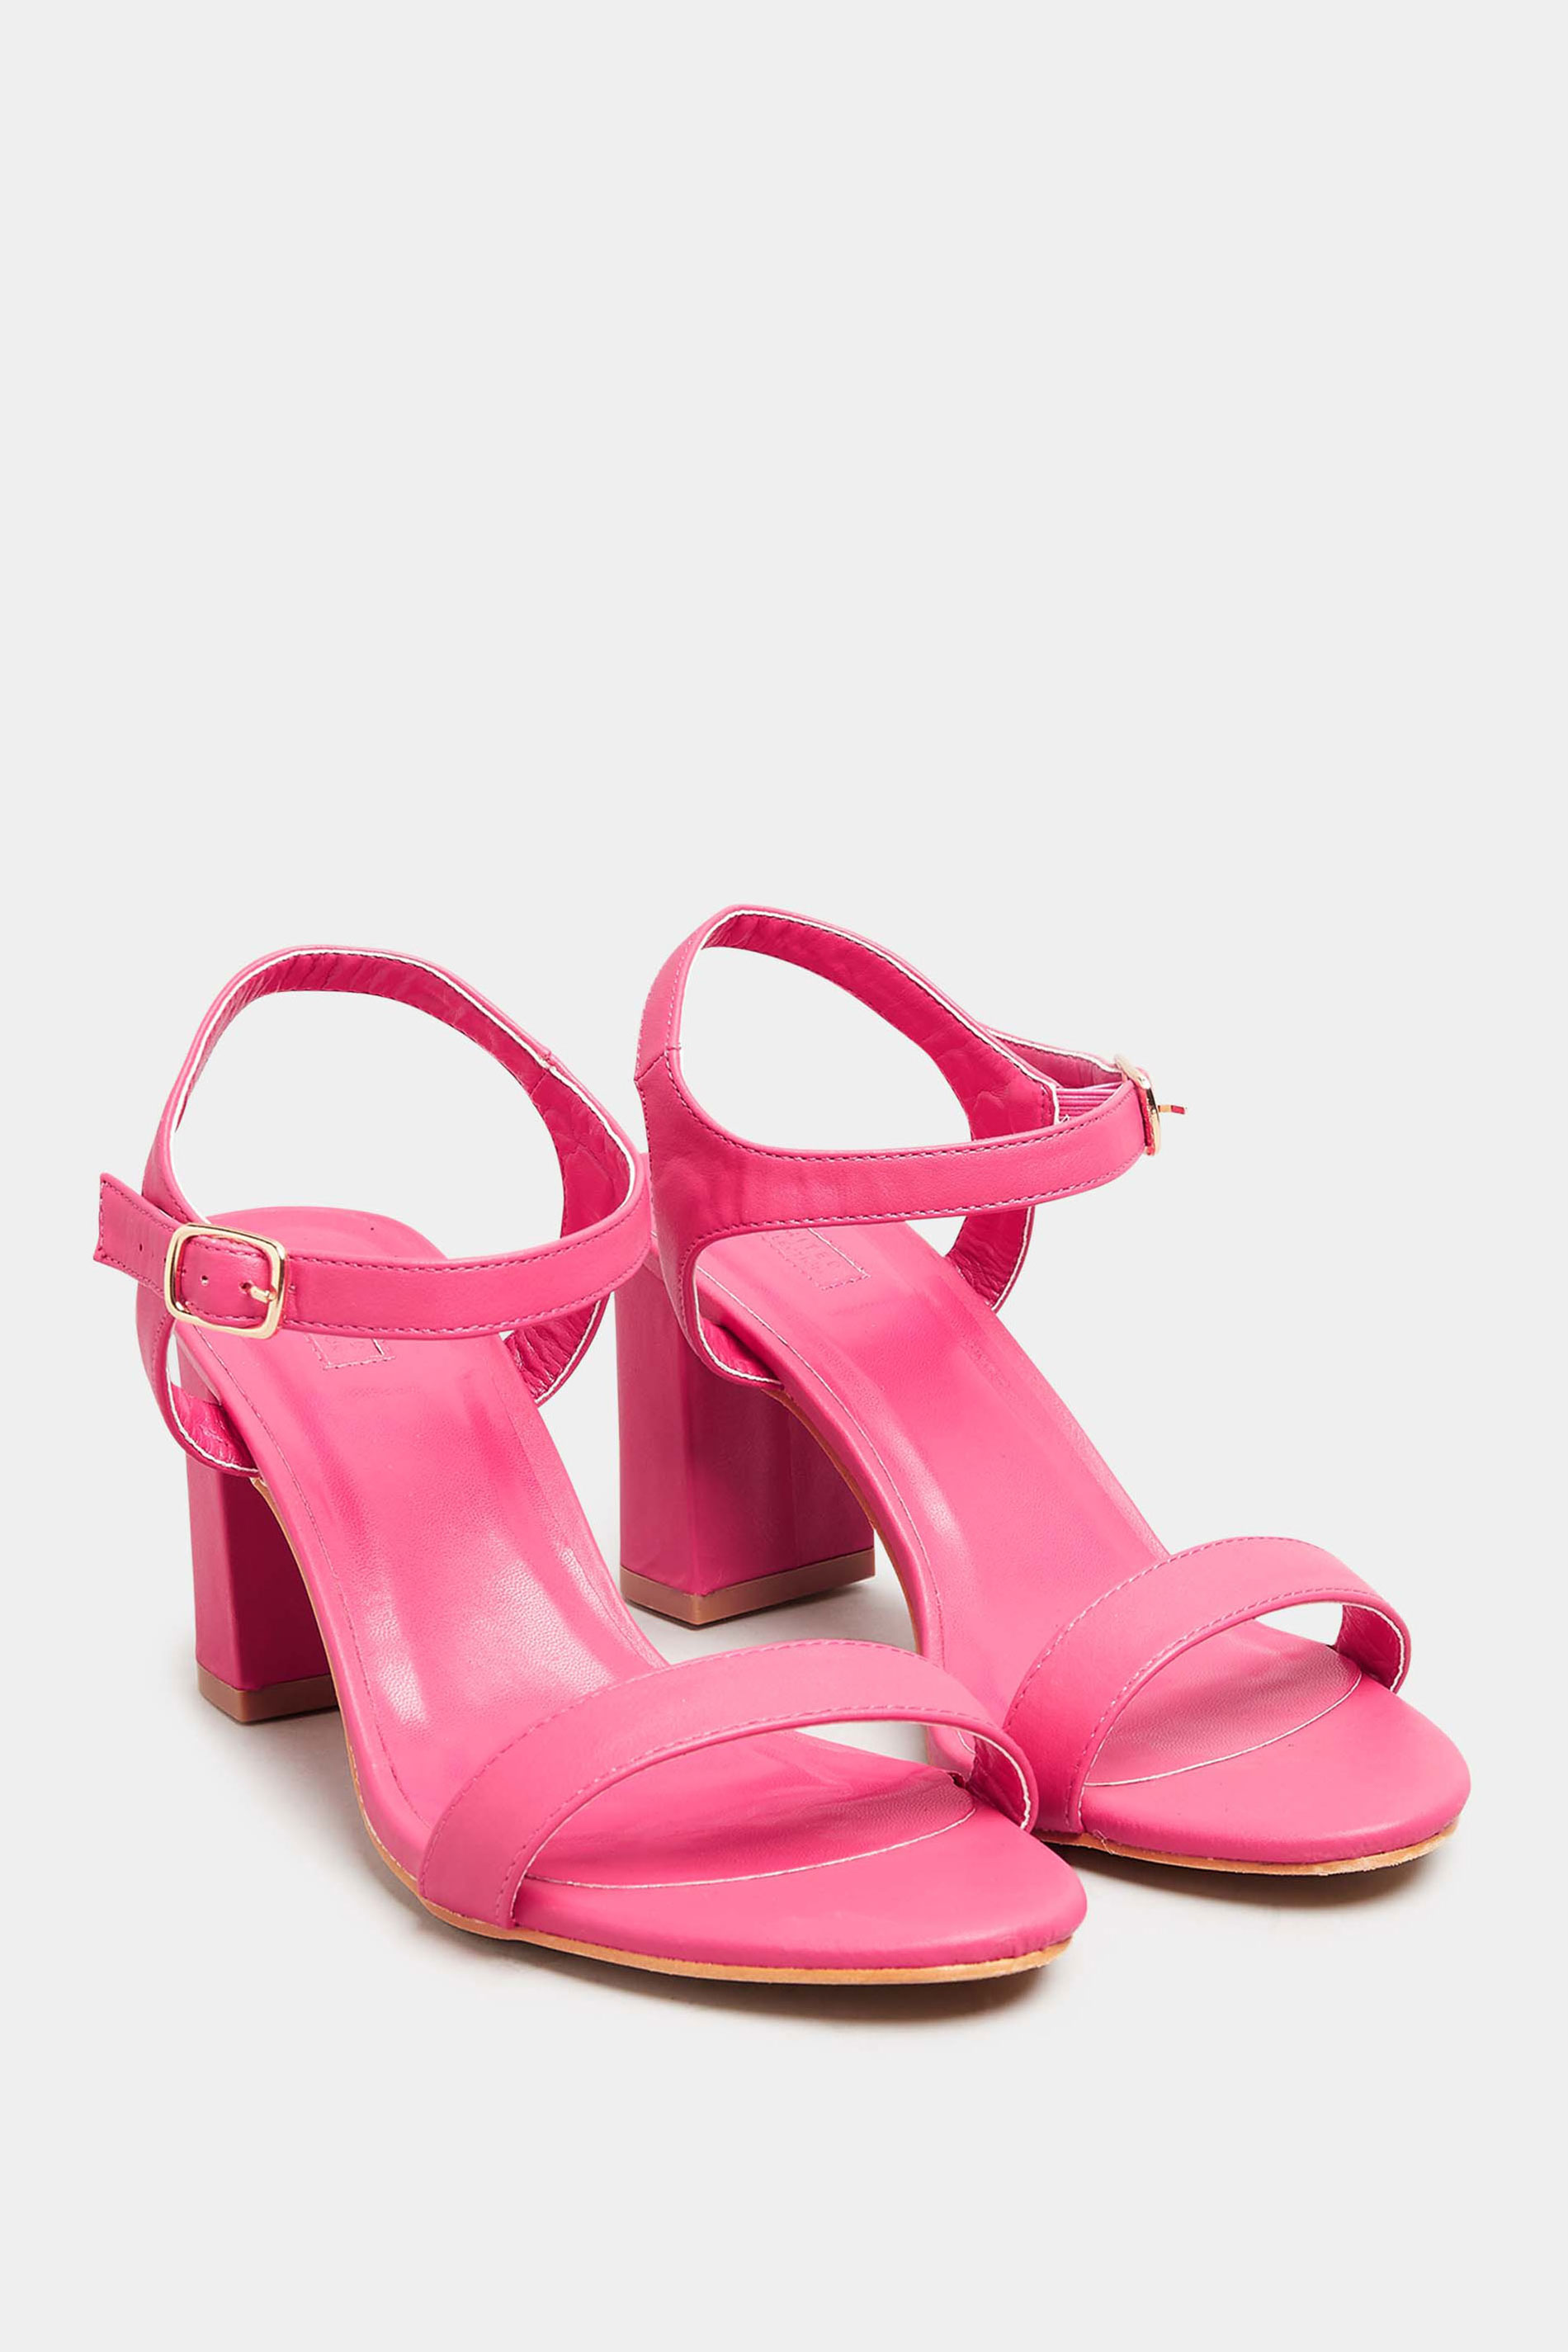 Limited Collection Hot Pink Block Heel Sandal in Wide E Fit & Extra Wide Fit - 8 | Women's Footwear, Shoes & Boots